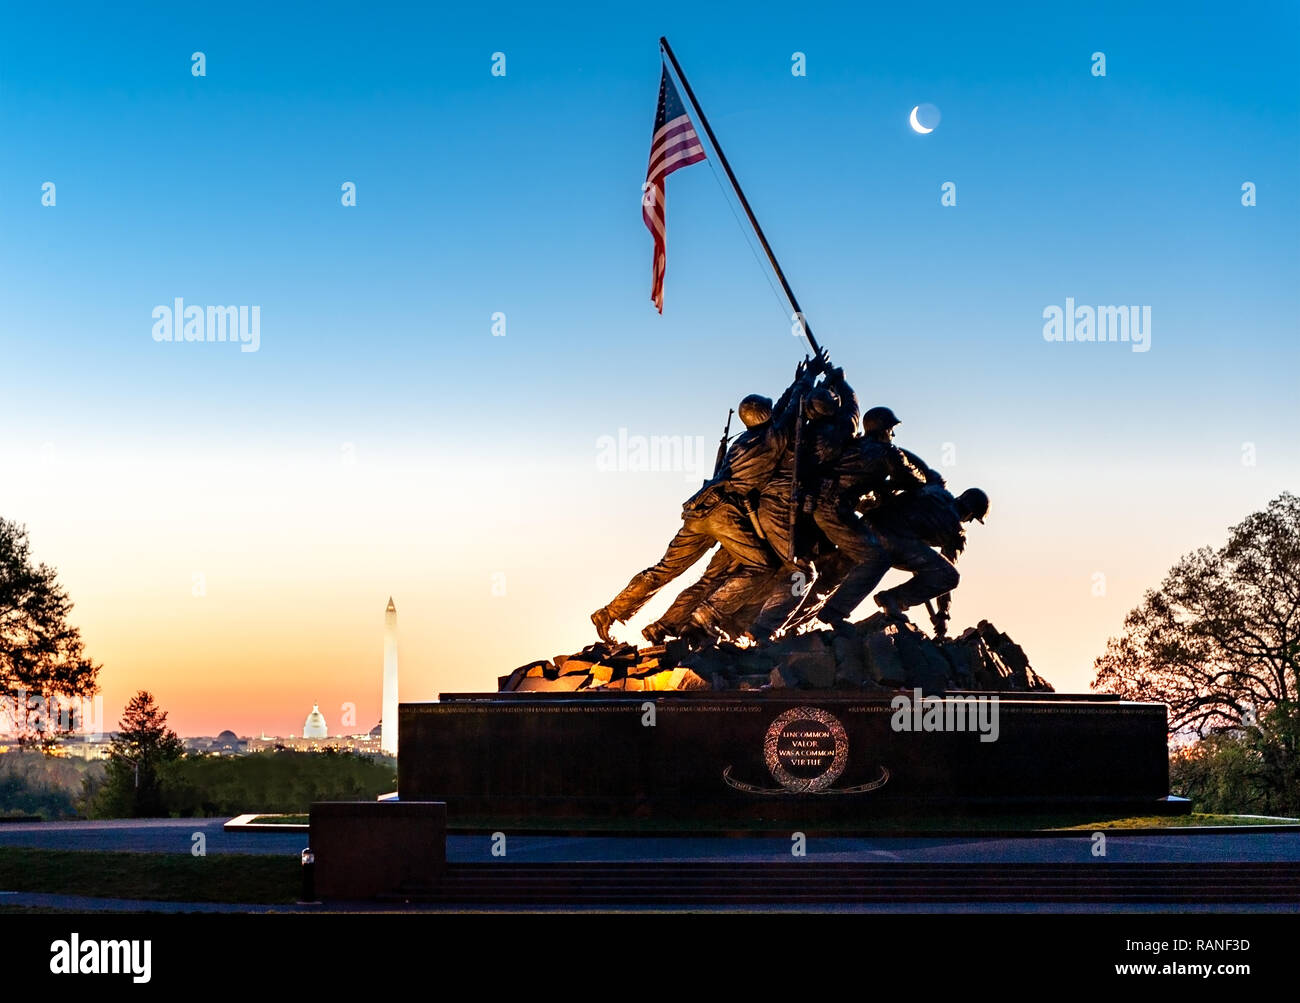 Marine War Memorial depicting the raising of the flag on Iwo Jima after the island was concurred by the US Marines. This image has the moon rising wit Stock Photo